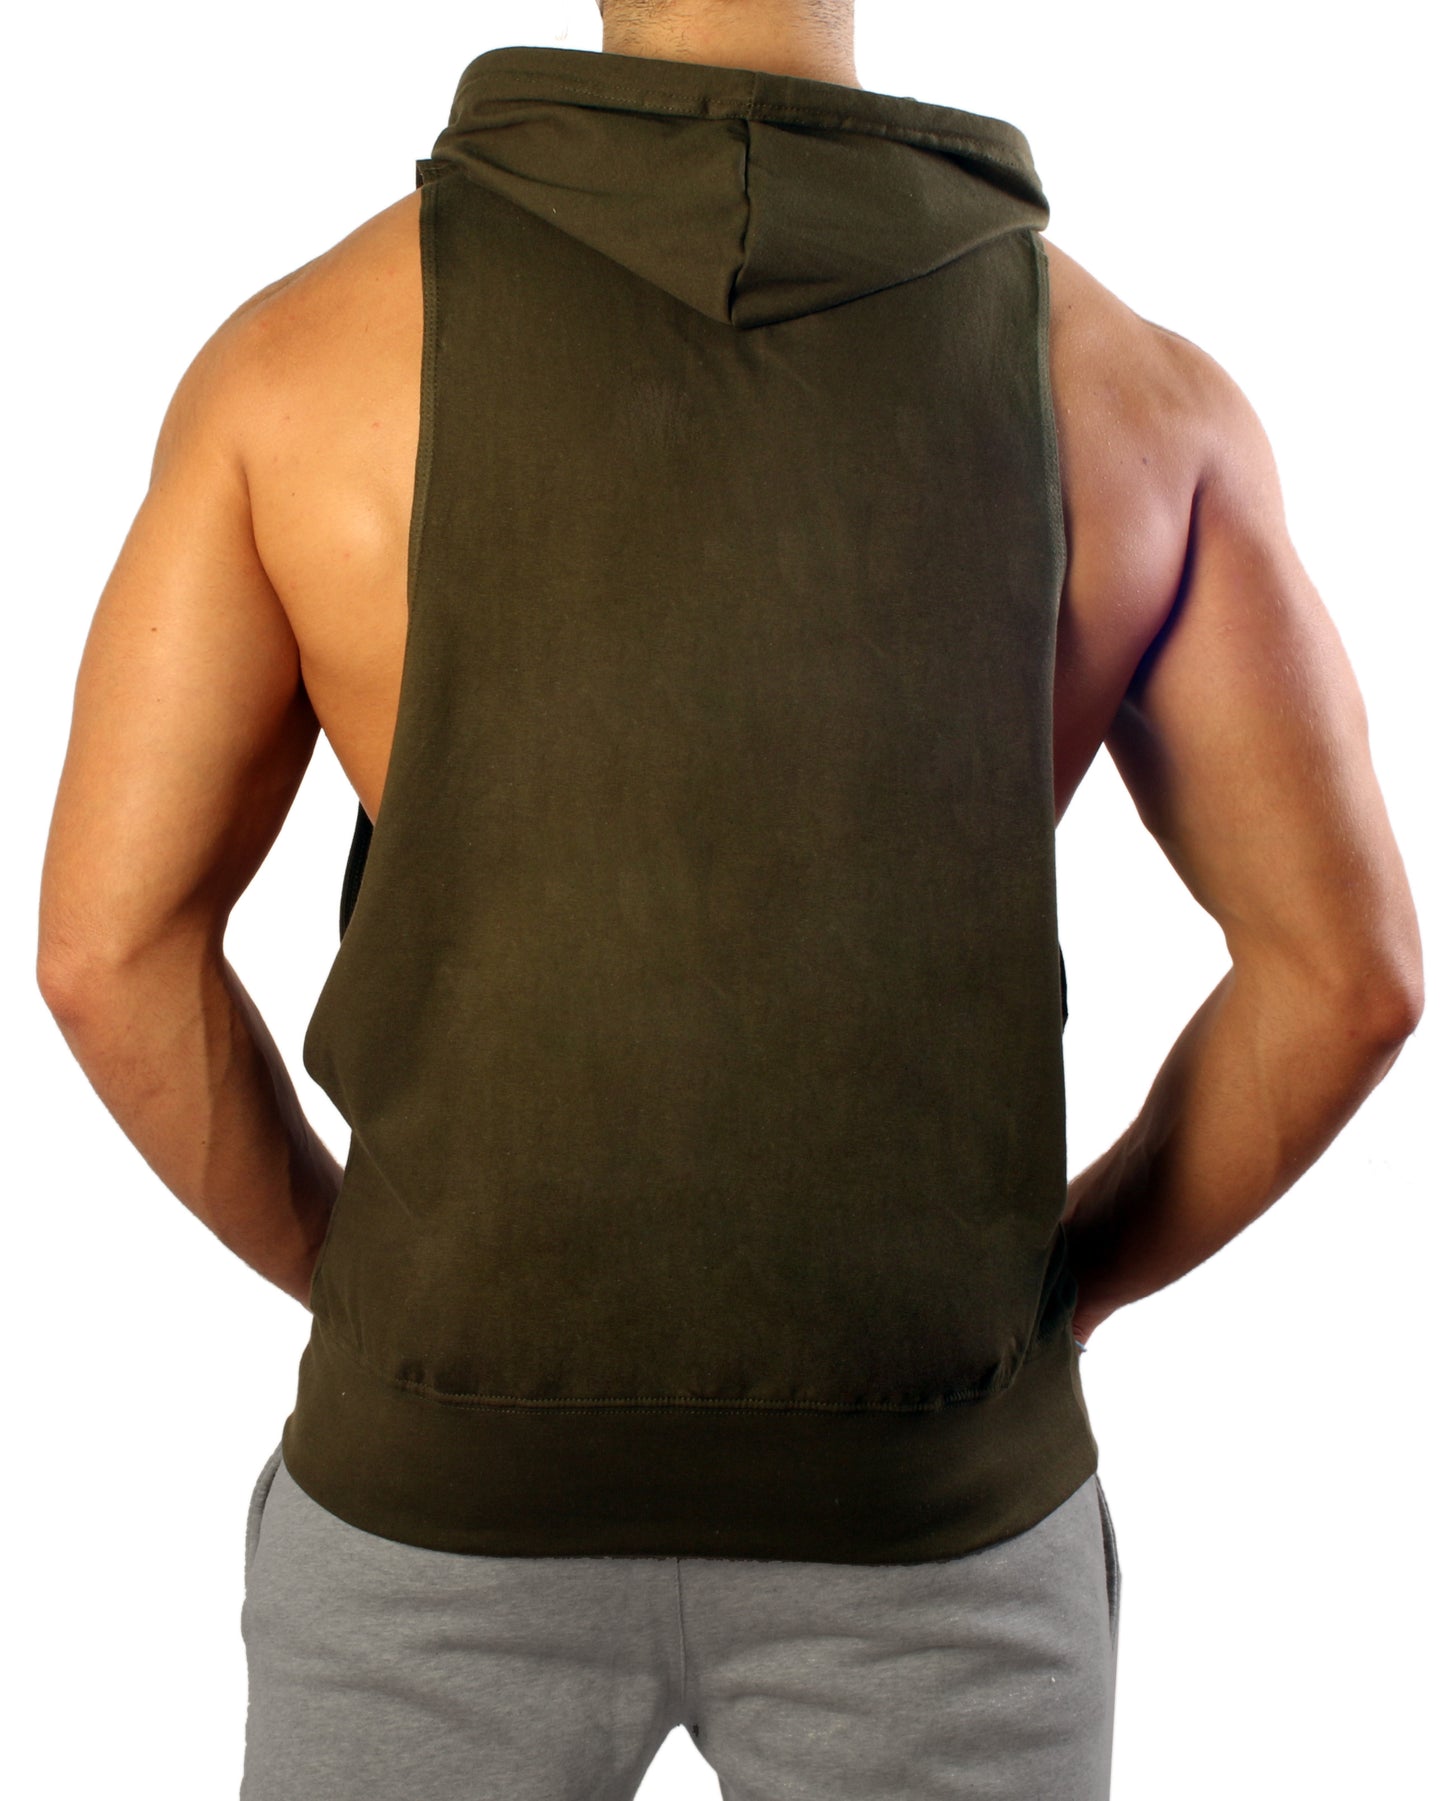 Fighter Tank Top "Fight Club" - Olive